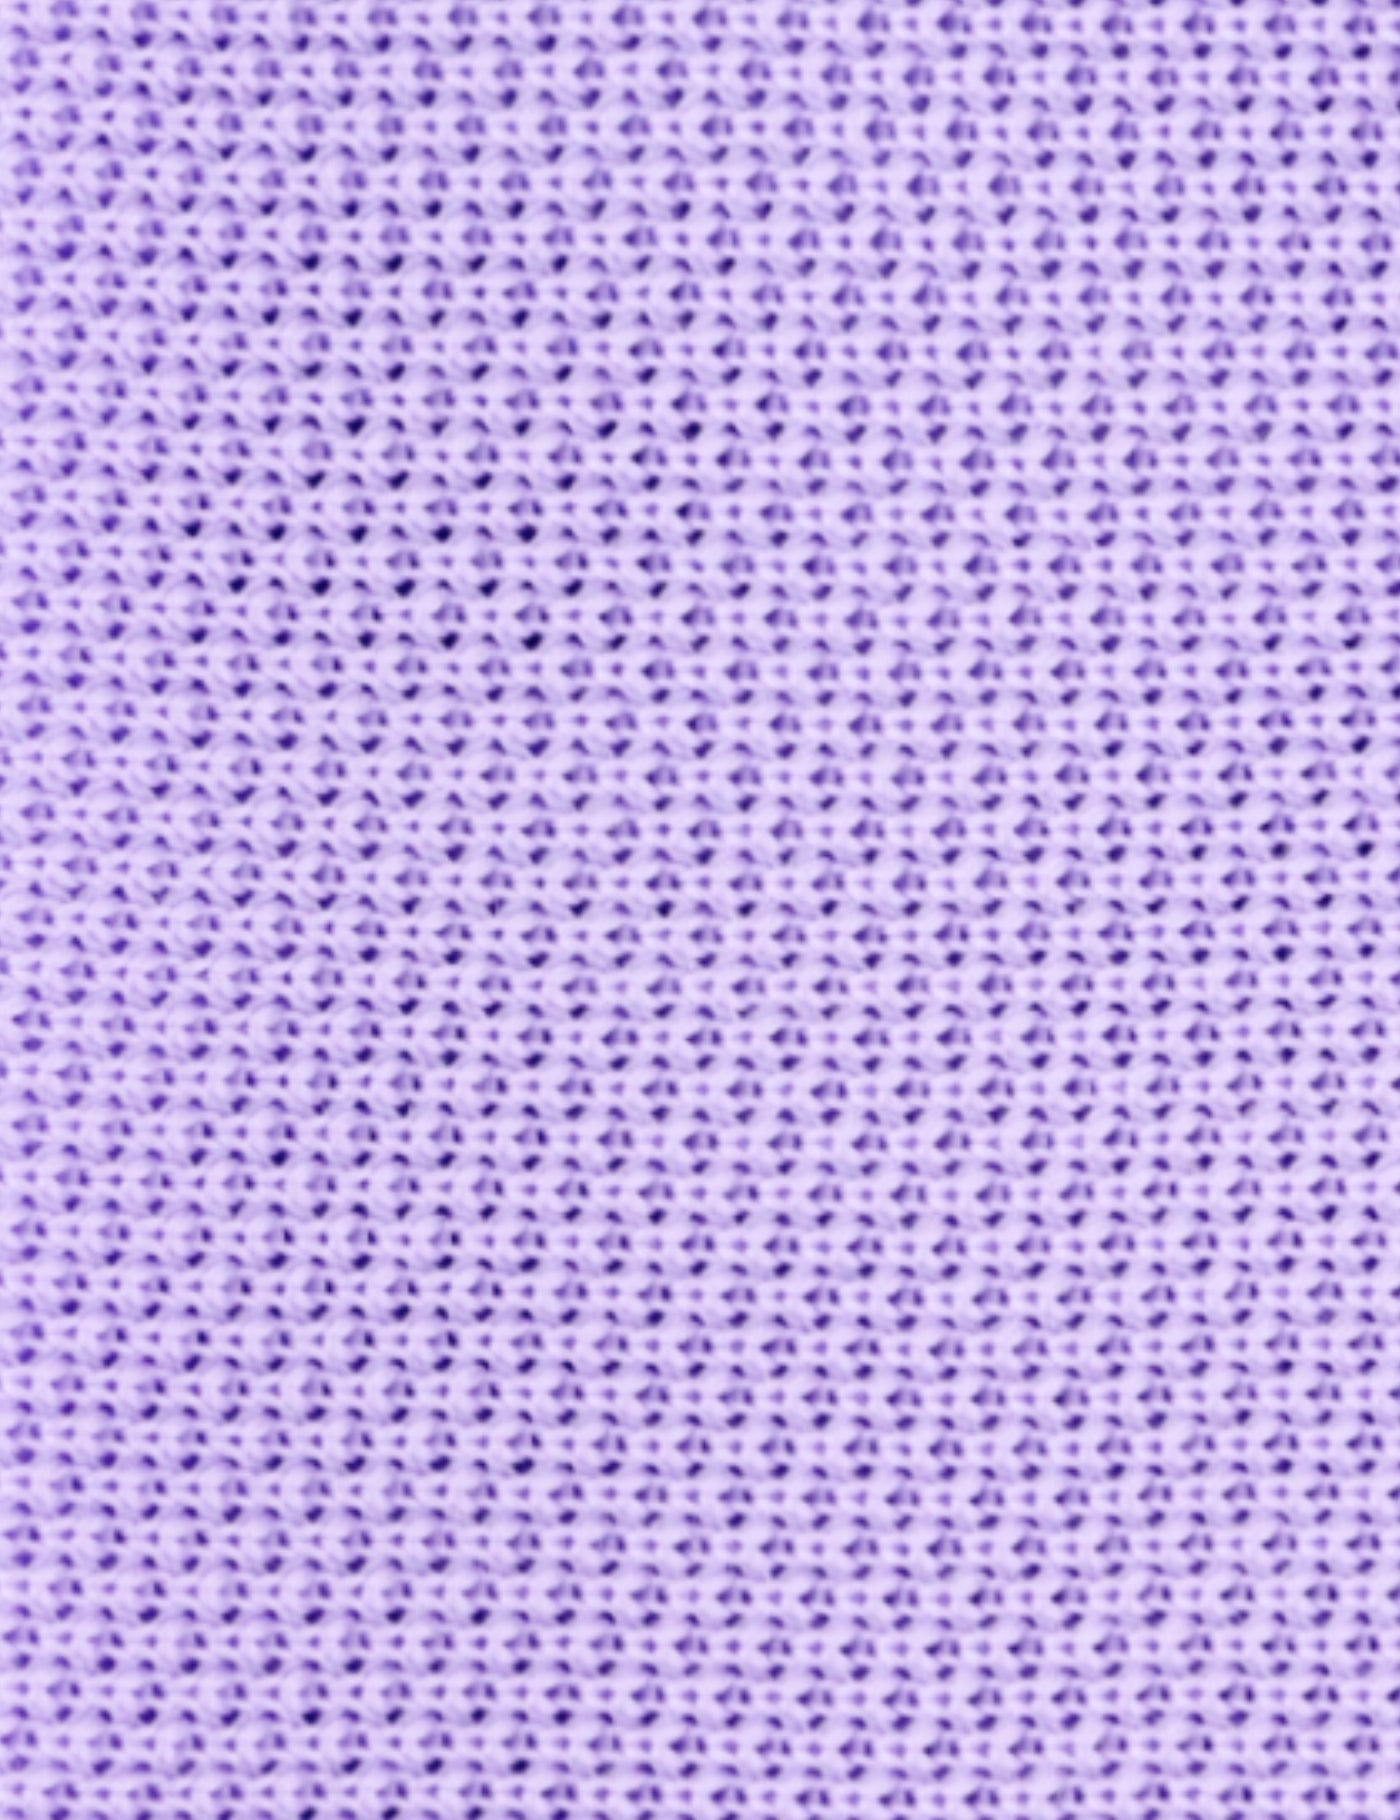 100% Polyester Square End Knitted Tie - Lavender Purple